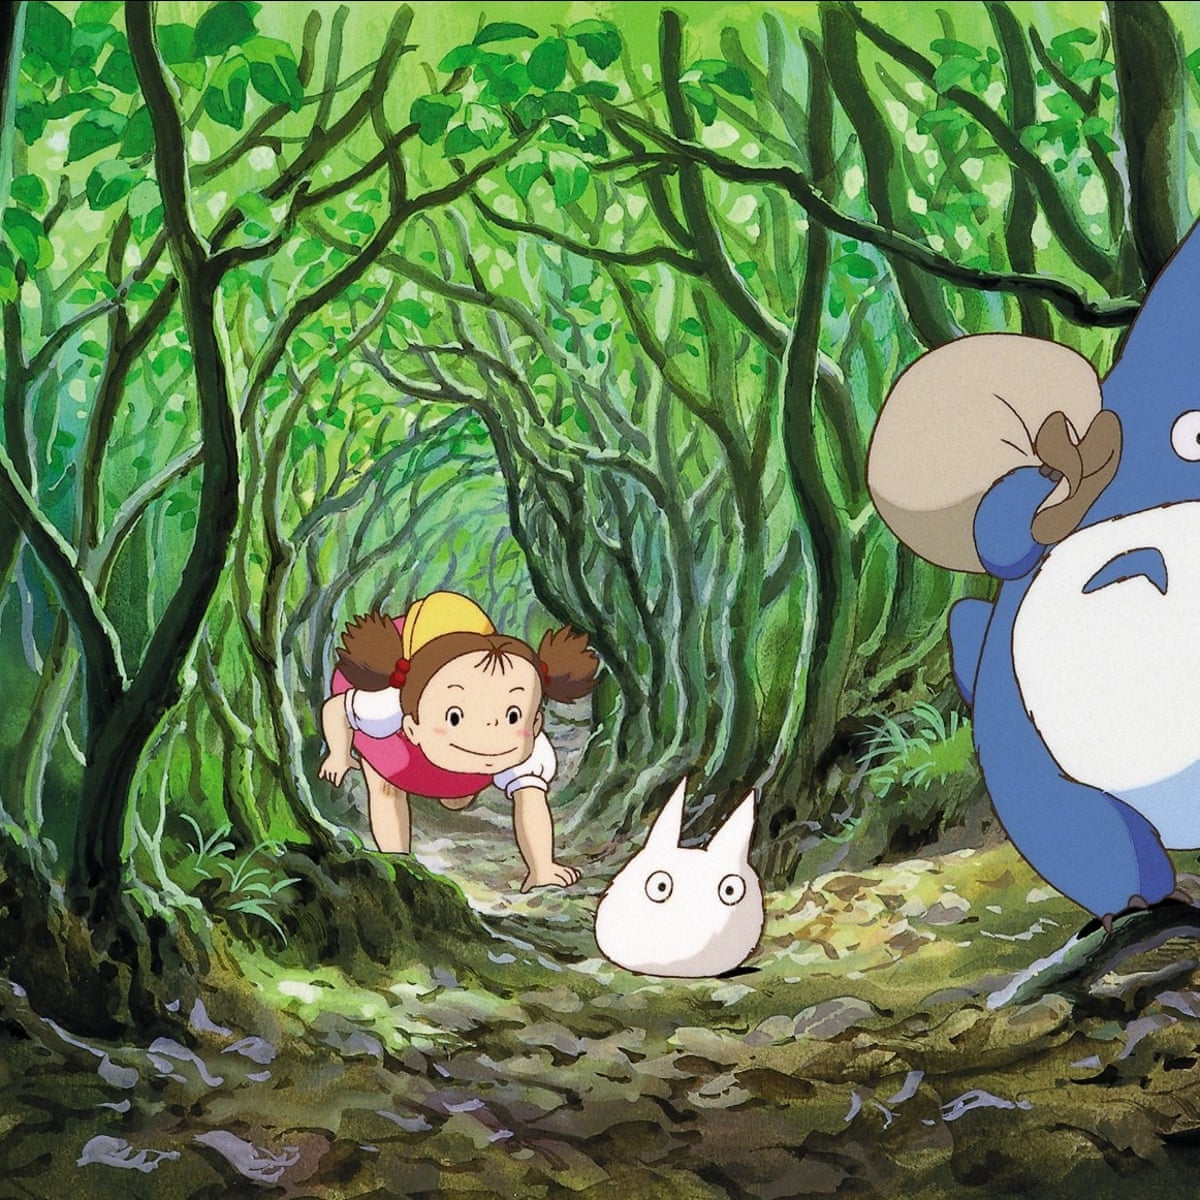 RSC to stage adaptation of animated fantasy film My Neighbour Totoro |  Royal Shakespeare Company | The Guardian